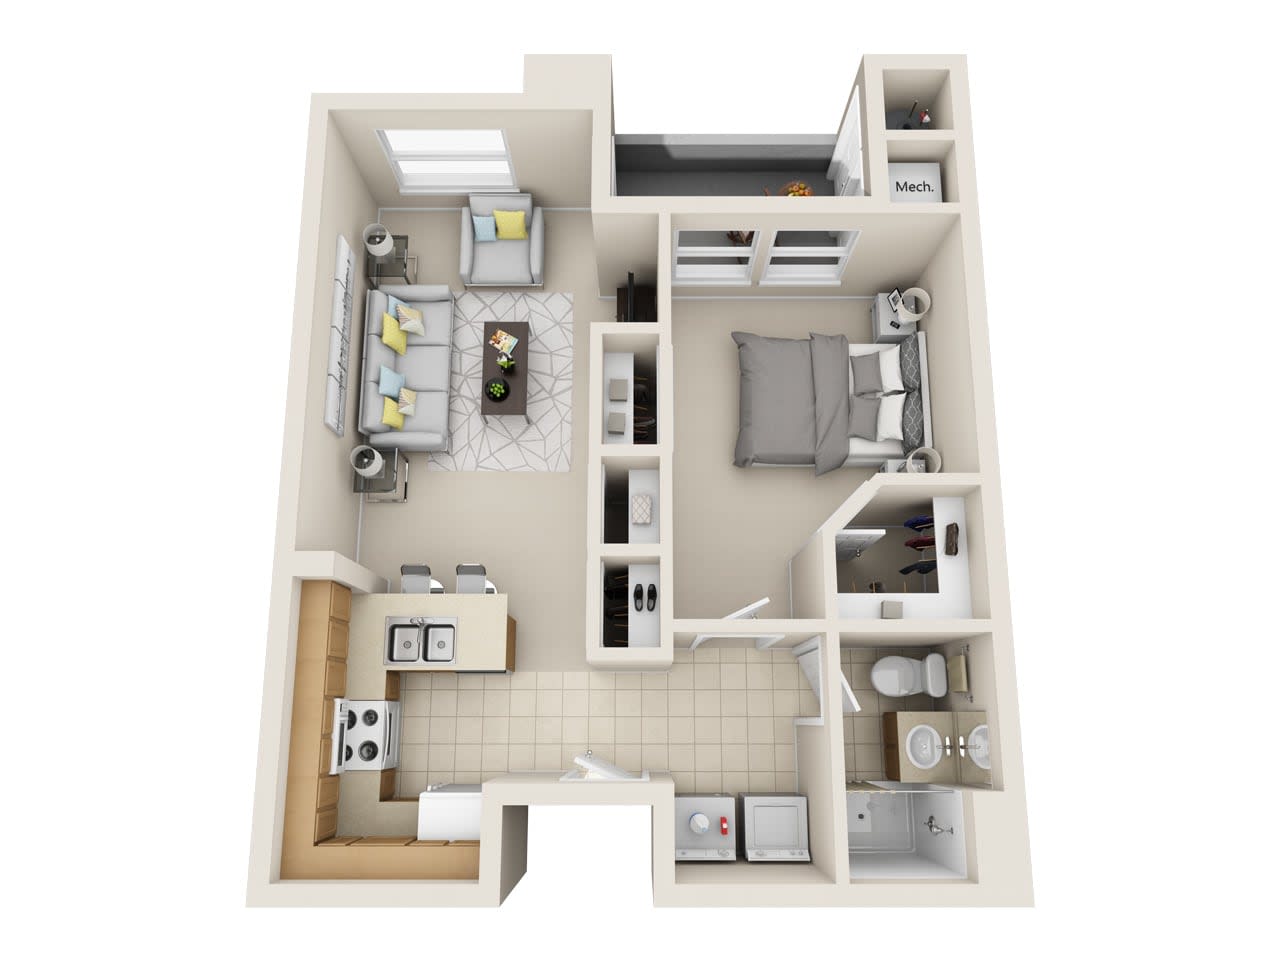 View one Bedroom Floor Plans at Sonoma Palms Apartments | Apartments in Las Vegas, Nevada